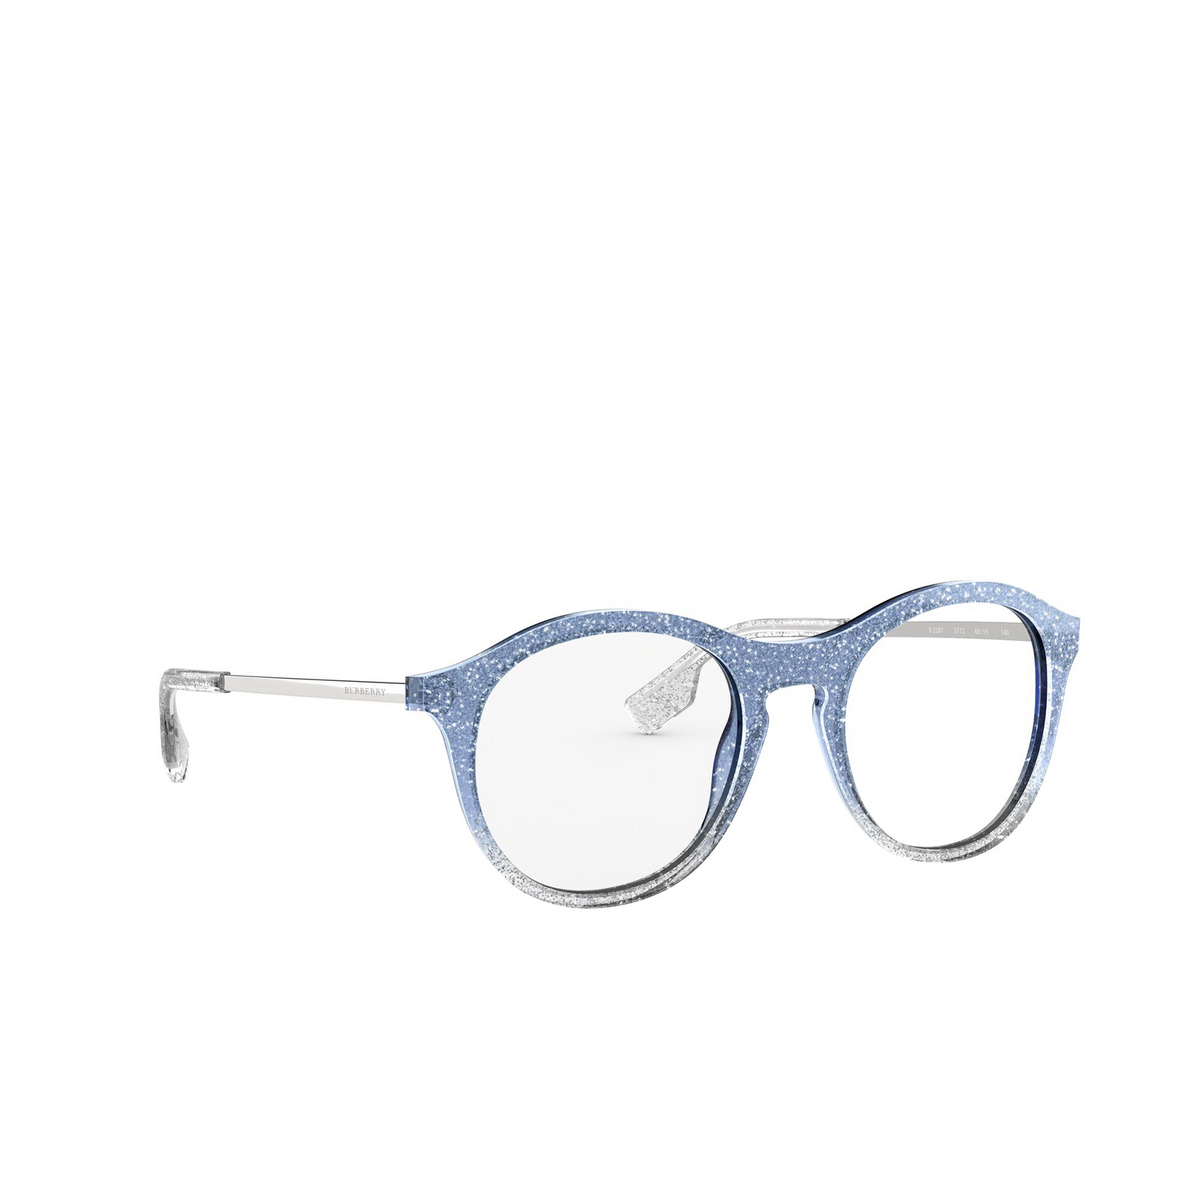 Burberry® Round Eyeglasses: BE2287 color Top Glitter On Gradient Blue 3772 - three-quarters view.